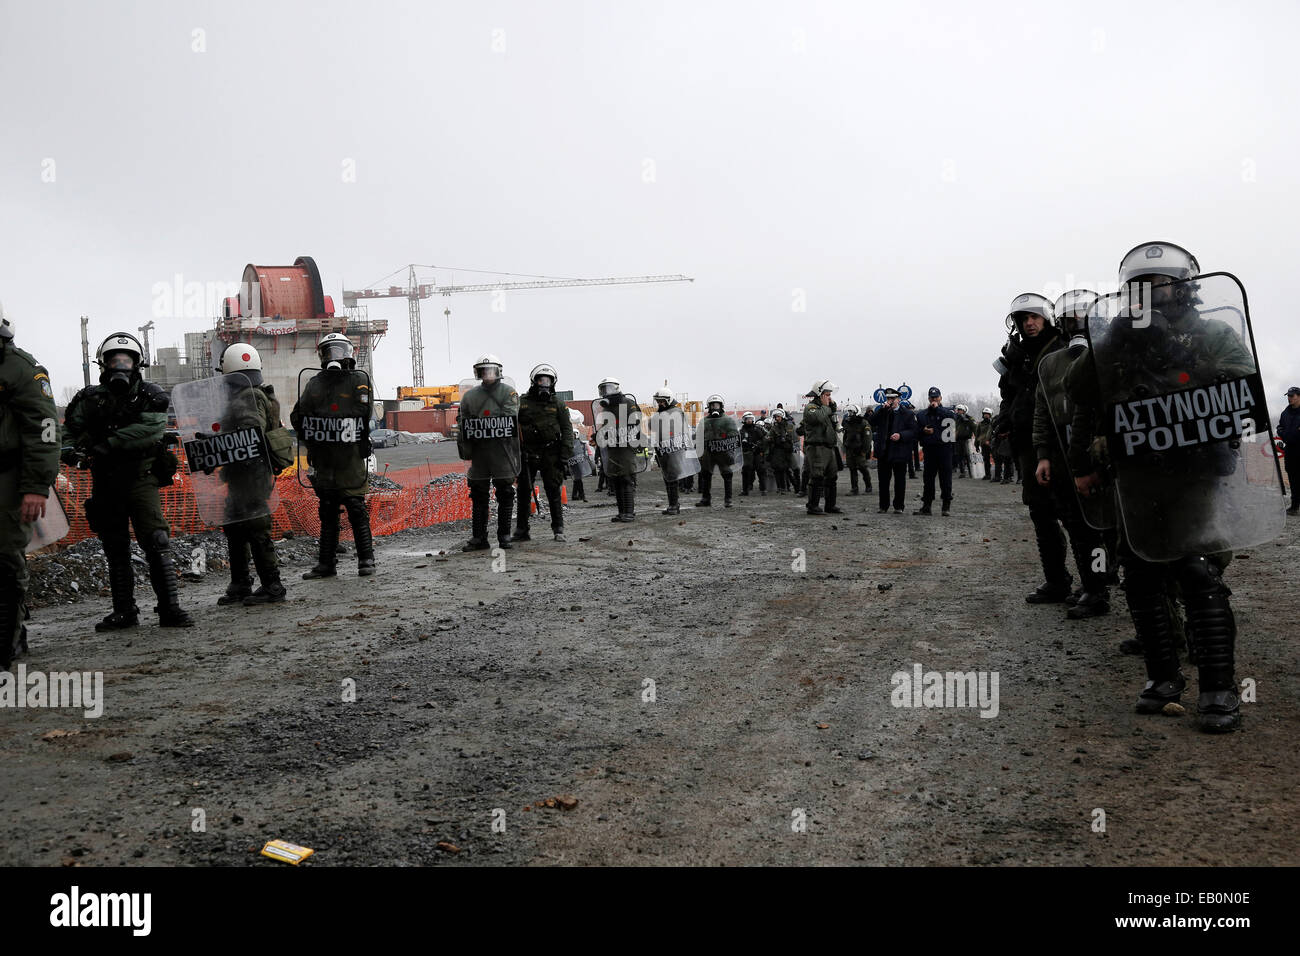 Skouries, Chalkidiki peninsula, Greece. 23rd November, 2014. Clashes between demonstrators and police during protest rally against gold mining in Skouries area on Mount Kakkavos in Chalkidiki peninsula, northern Greece on November 23, 2014. Credit:  Konstantinos Tsakalidis/Alamy Live News Stock Photo